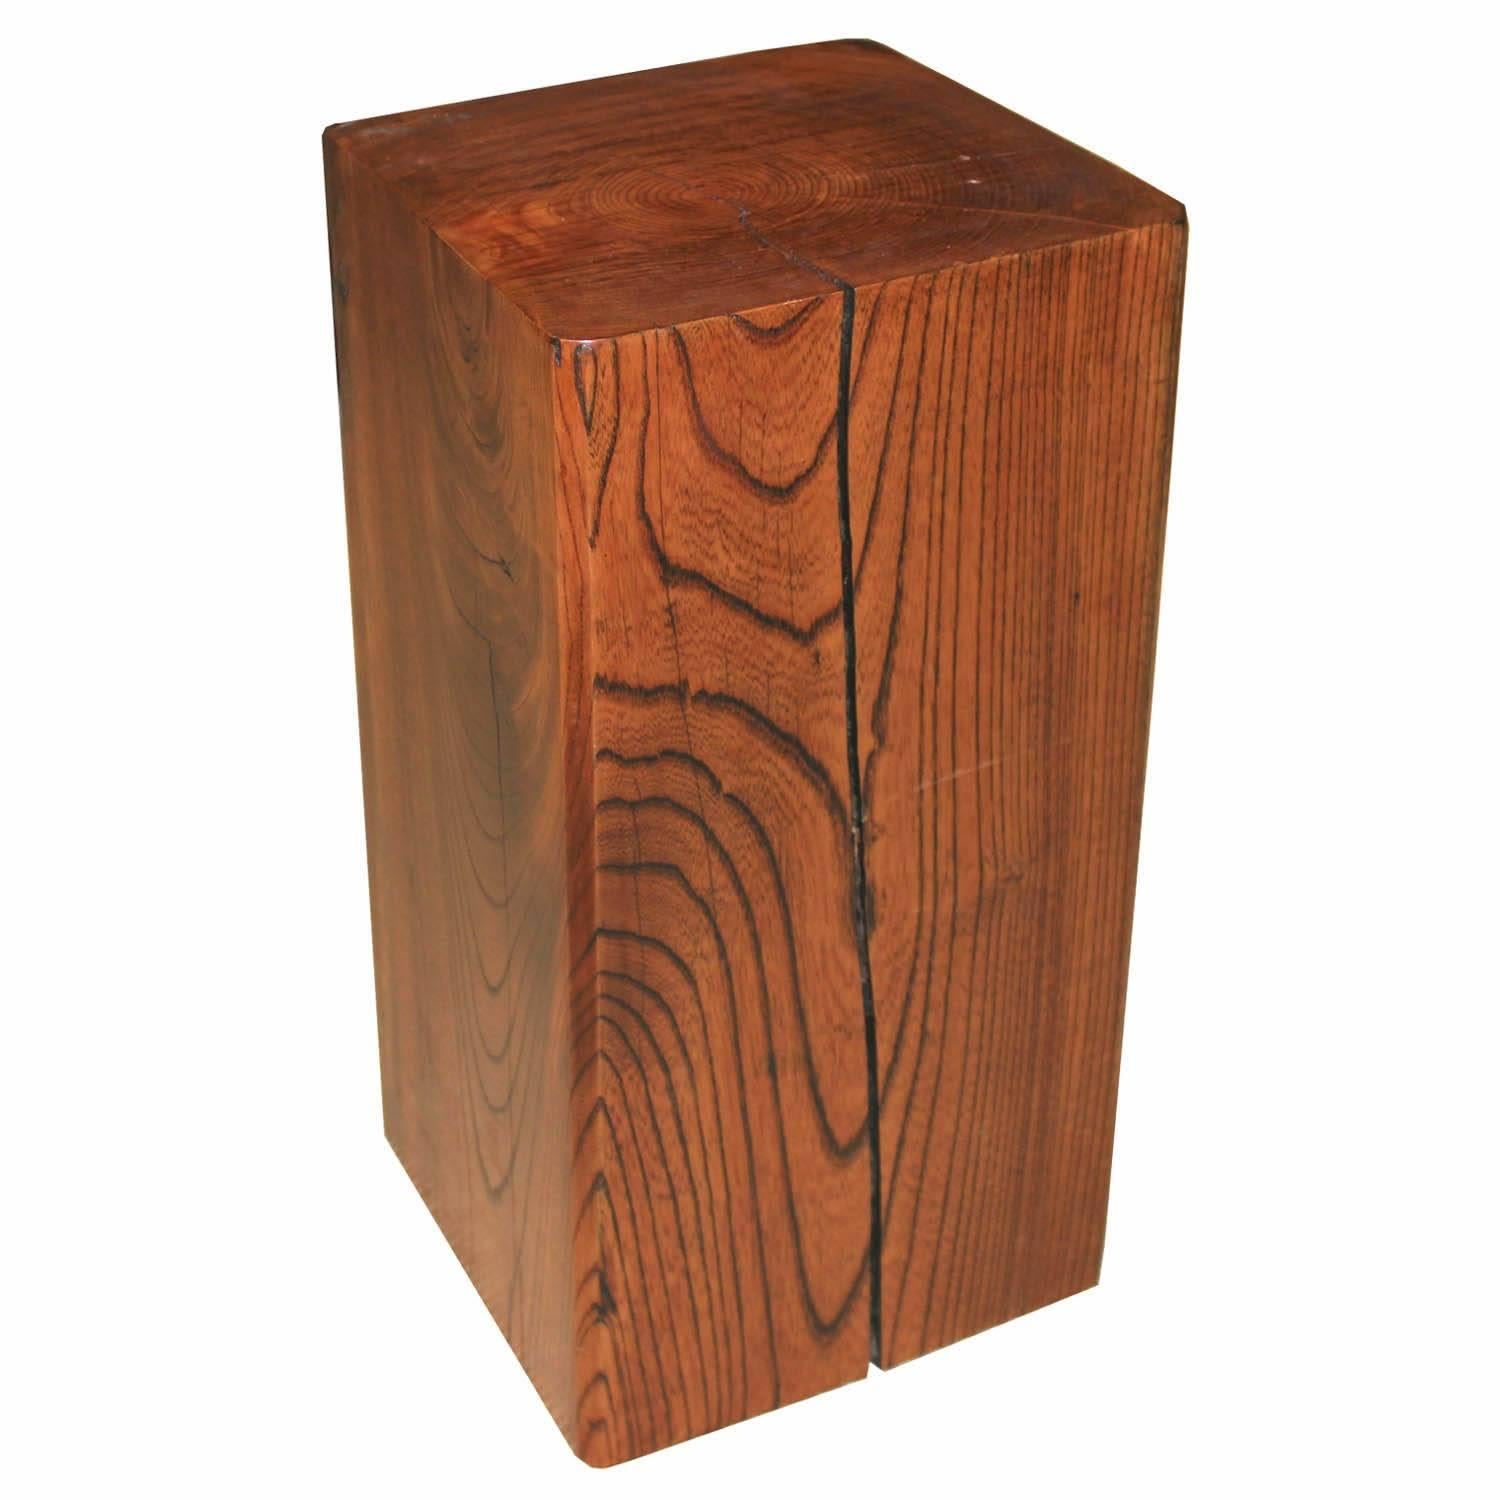 Natural ceiling beam was used in Northern Japan in farm houses as ceiling beams. Keyaki wood is highly prized wood in Japan for its beautiful grain, hardness and weight. Perfect side table or coffee table for indoor or outdoor use. Made from wood